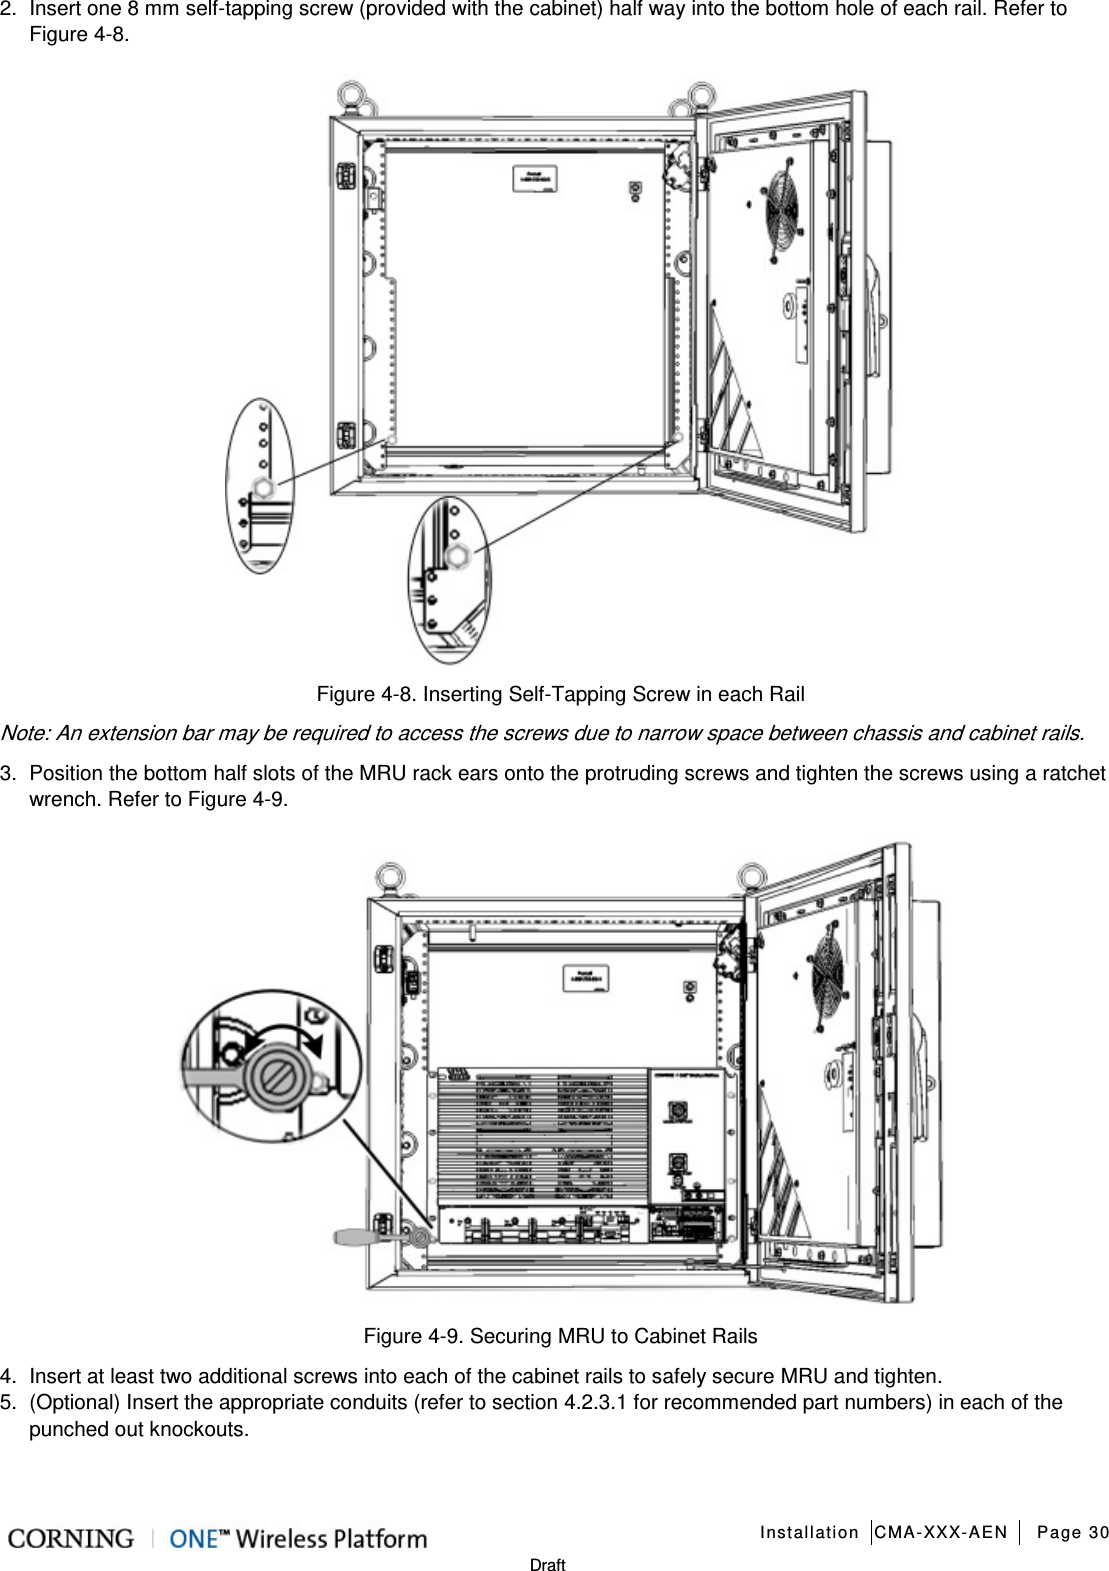   Installation CMA-XXX-AEN Page 30   Draft 2.  Insert one 8 mm self-tapping screw (provided with the cabinet) half way into the bottom hole of each rail. Refer to Figure  4-8.  Figure  4-8. Inserting Self-Tapping Screw in each Rail Note: An extension bar may be required to access the screws due to narrow space between chassis and cabinet rails. 3.  Position the bottom half slots of the MRU rack ears onto the protruding screws and tighten the screws using a ratchet wrench. Refer to Figure  4-9.  Figure  4-9. Securing MRU to Cabinet Rails 4.  Insert at least two additional screws into each of the cabinet rails to safely secure MRU and tighten. 5.  (Optional) Insert the appropriate conduits (refer to section  4.2.3.1 for recommended part numbers) in each of the punched out knockouts.    